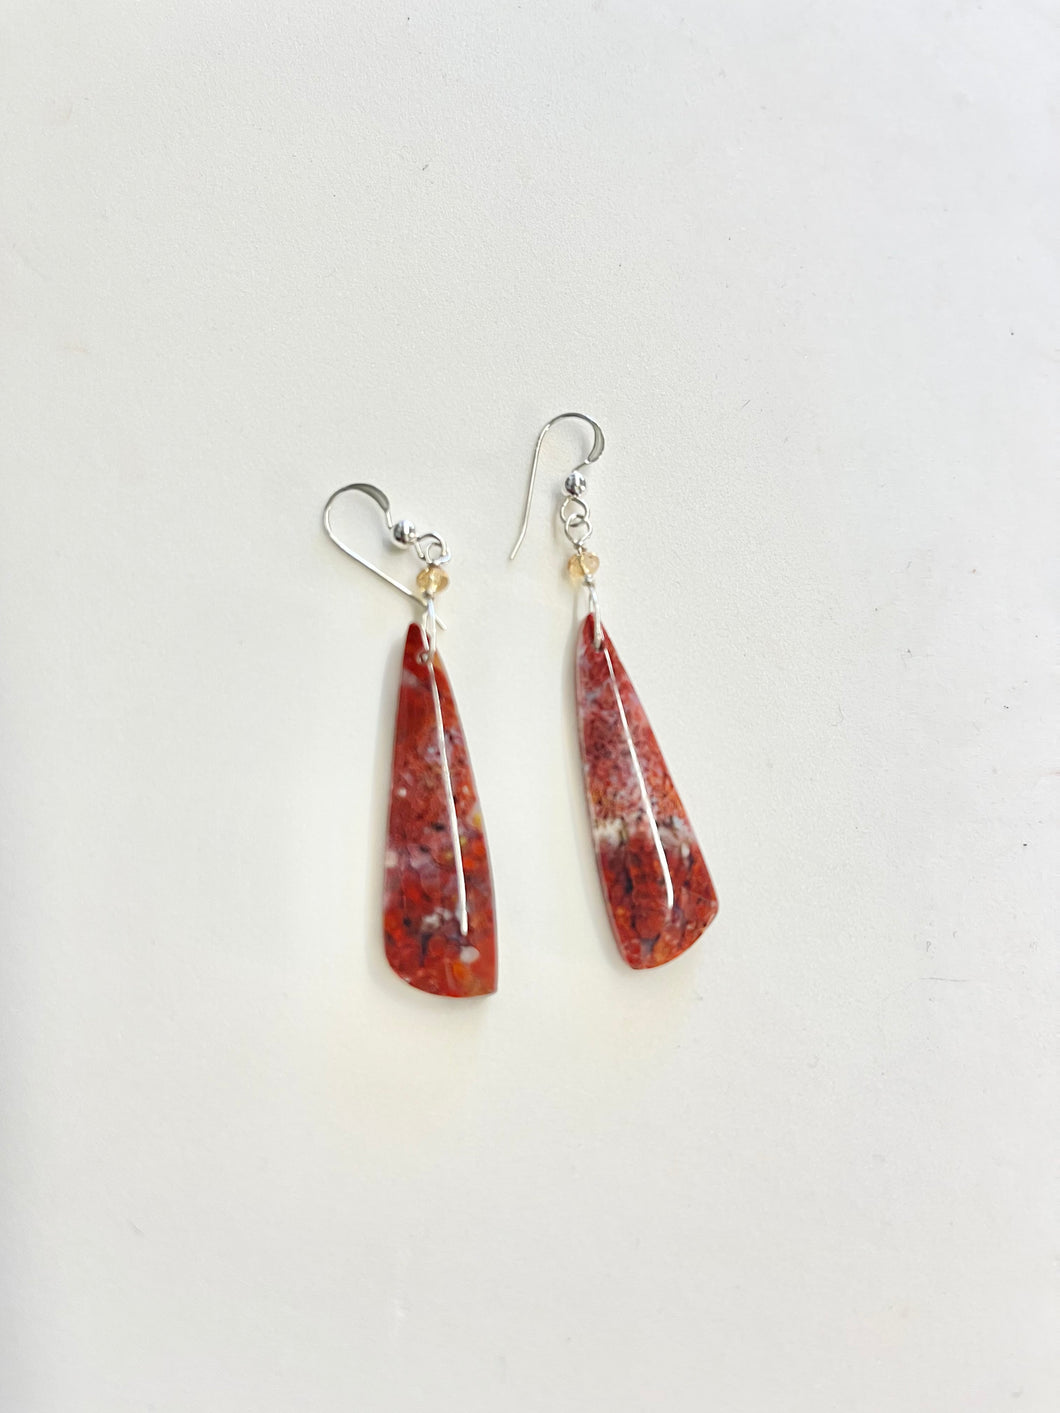 Earrings with plume agate in burgundy colors